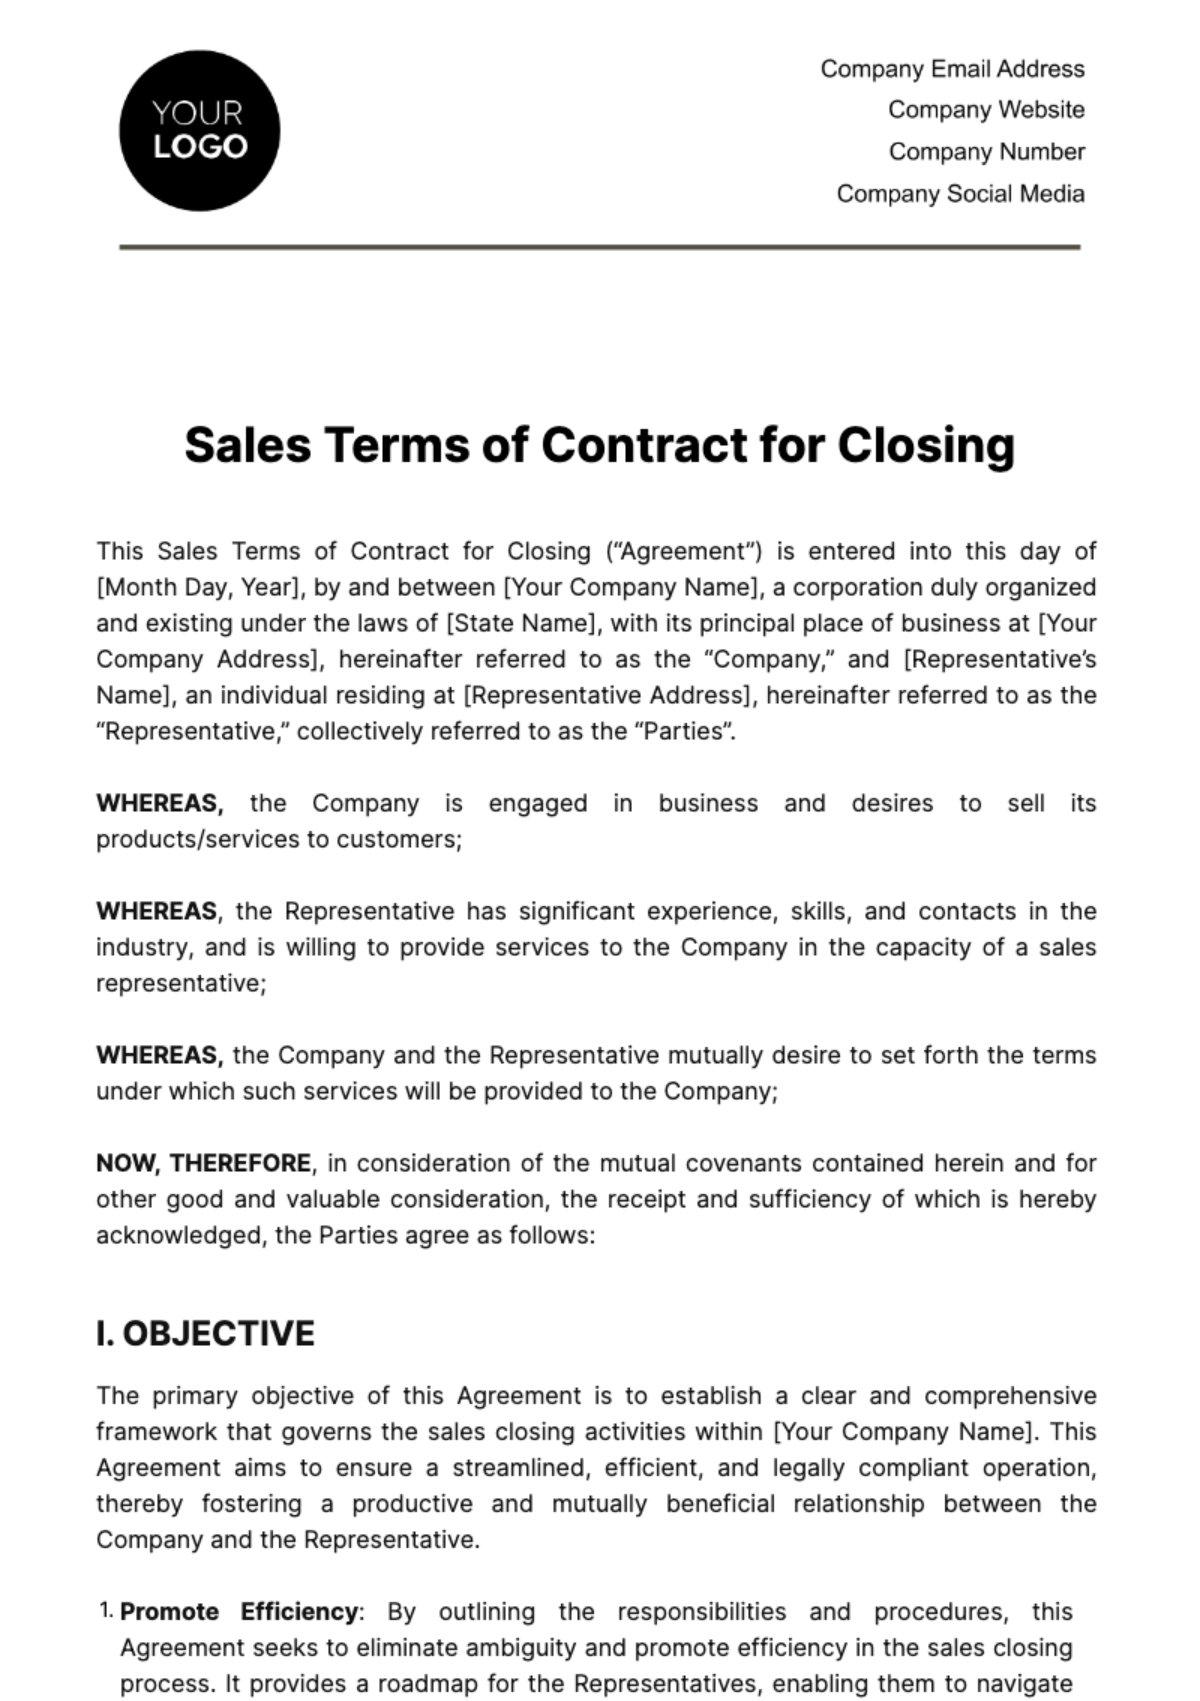 Free Sales Terms of Contract for Closing Template